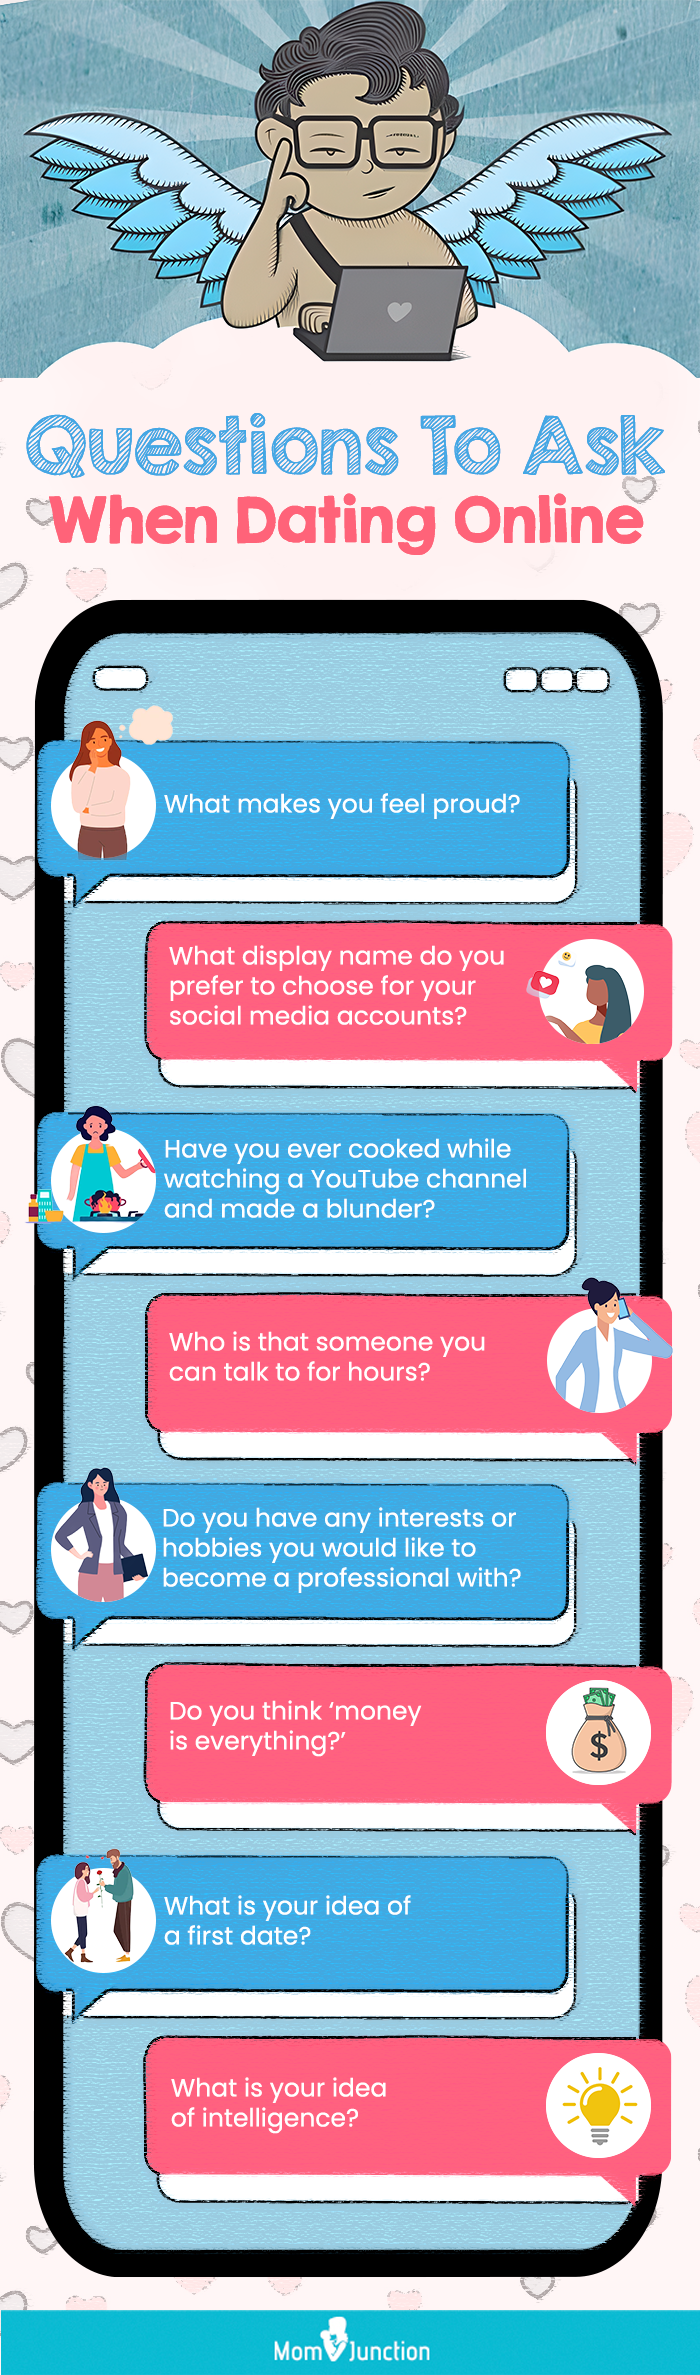 questions to ask on online dating [infographic]